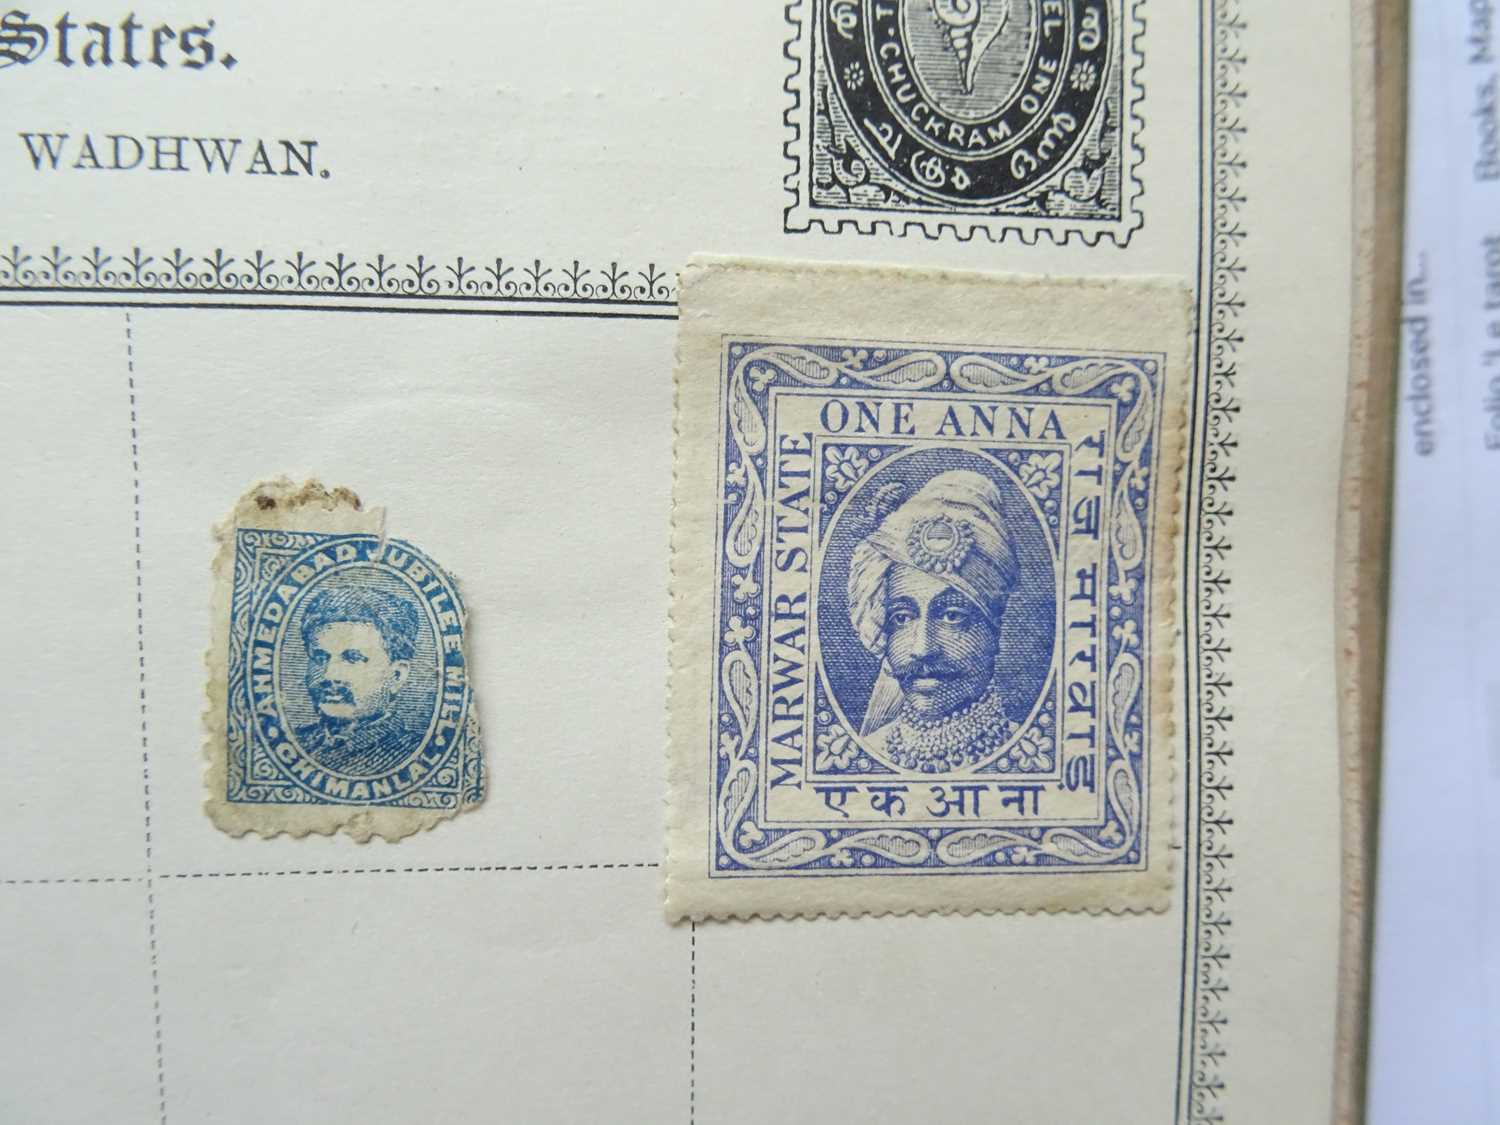 Vintage Stamp Collection, in 'The Queen' album incl. penny black, Canada 10cts Jubilee partly - Image 5 of 10